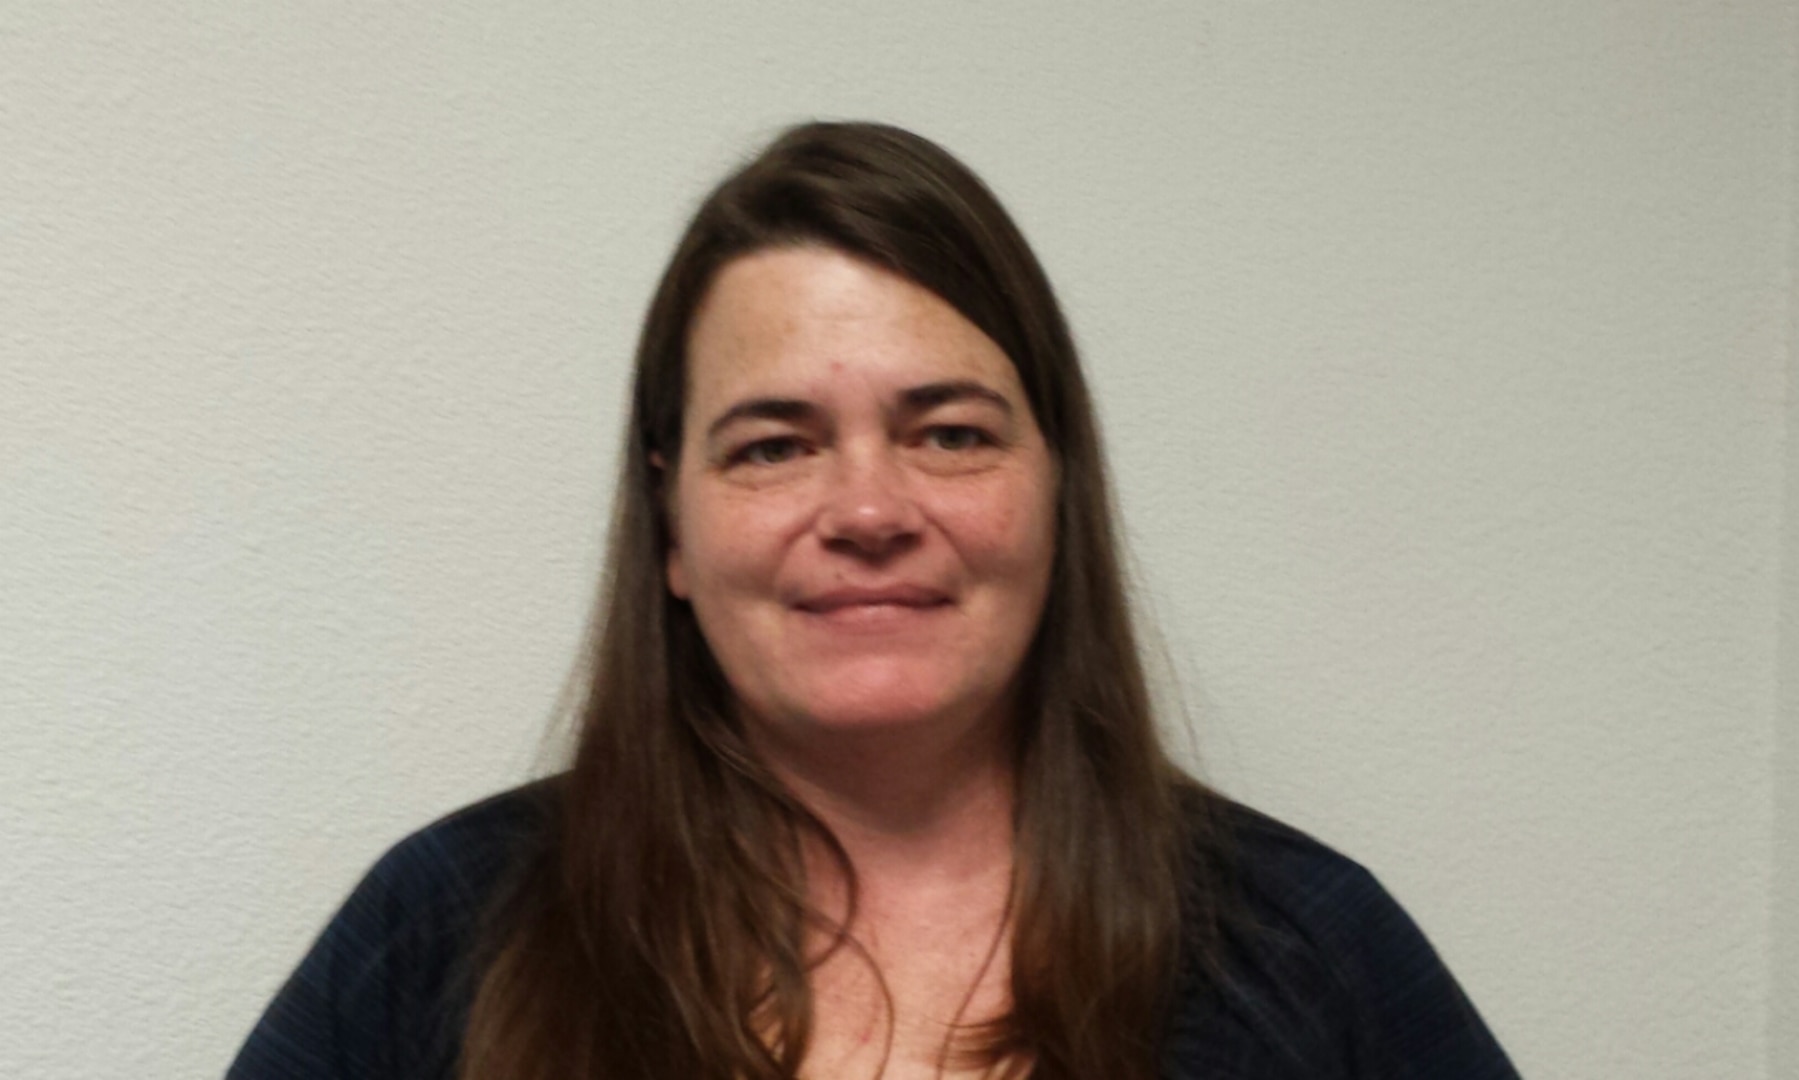 Anne M. Coleman, materials examiner/identifier supervisor at Defense Logistics Agency Distribution Puget Sound, Wash., has been awarded Global Distribution Excellence: Material Management Civilian Supervisor of the Year.